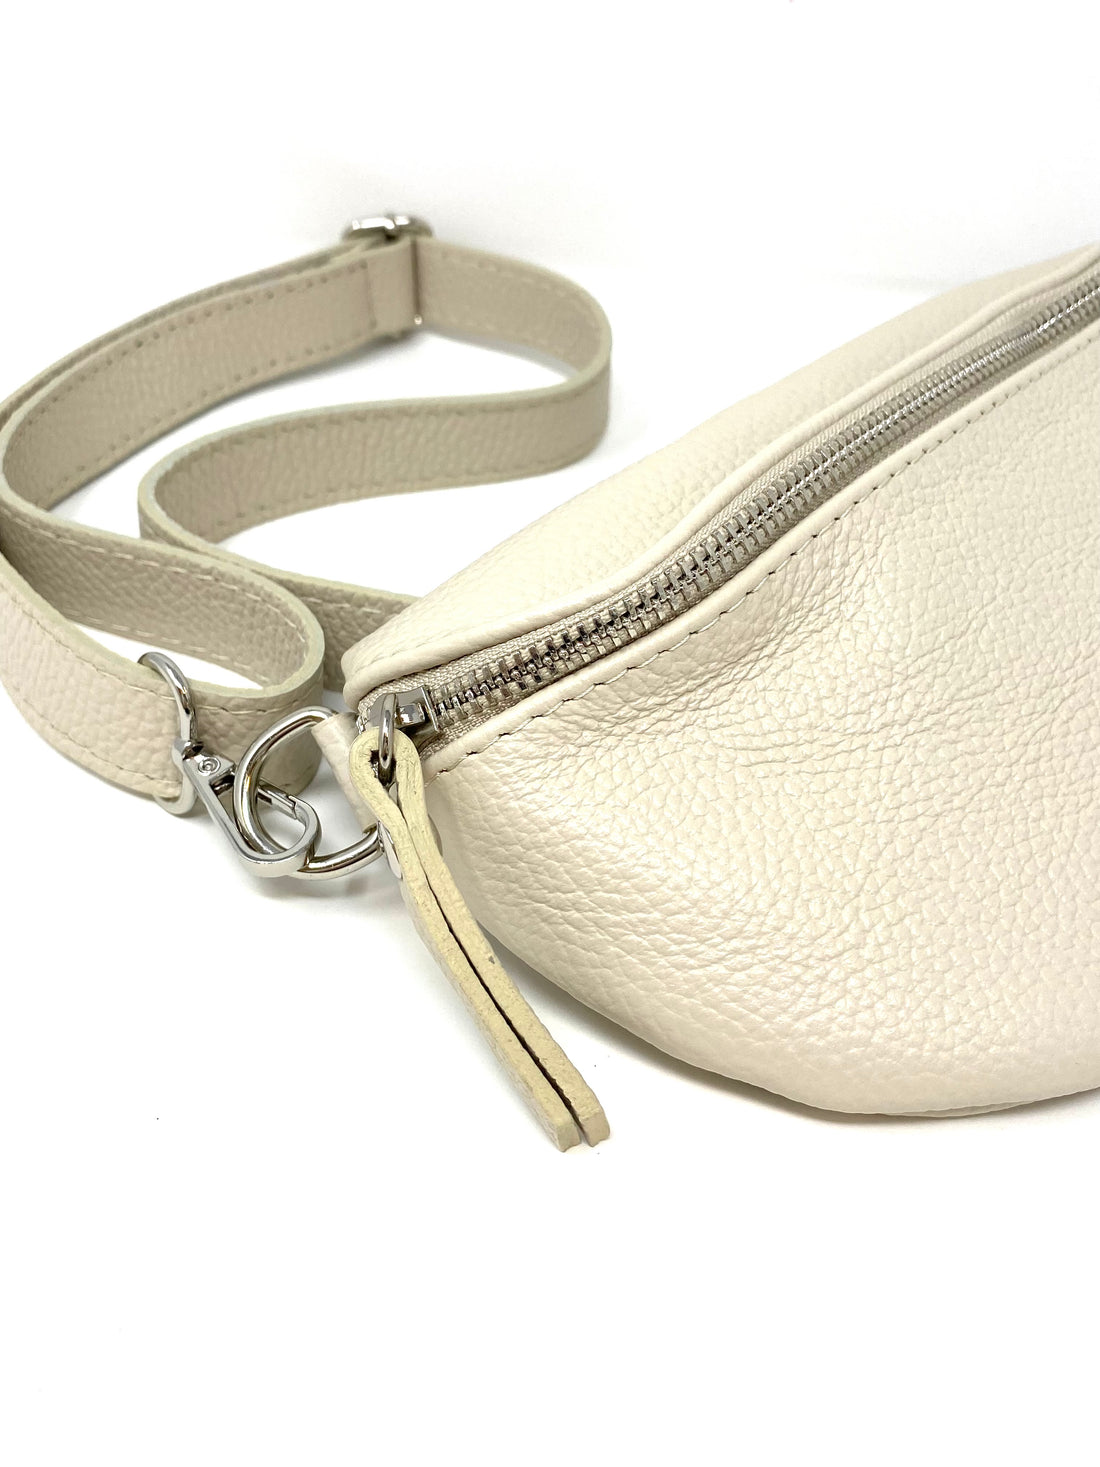 Sol Leather Fanny Pack in Bone